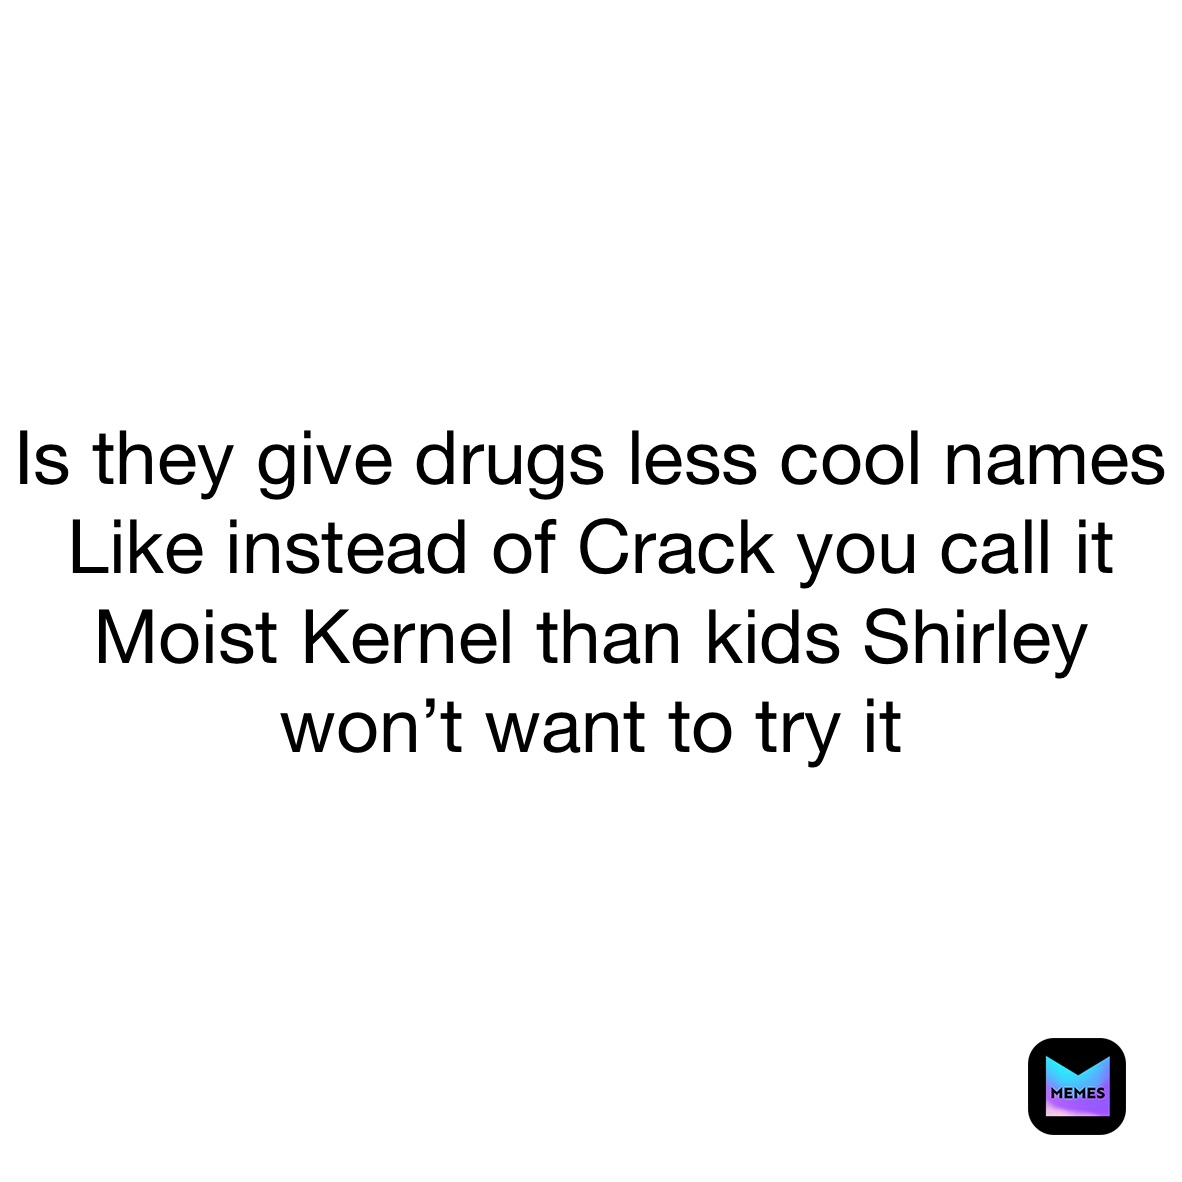 Is they give drugs less cool names
Like instead of Crack you call it Moist Kernel than kids Shirley won’t want to try it